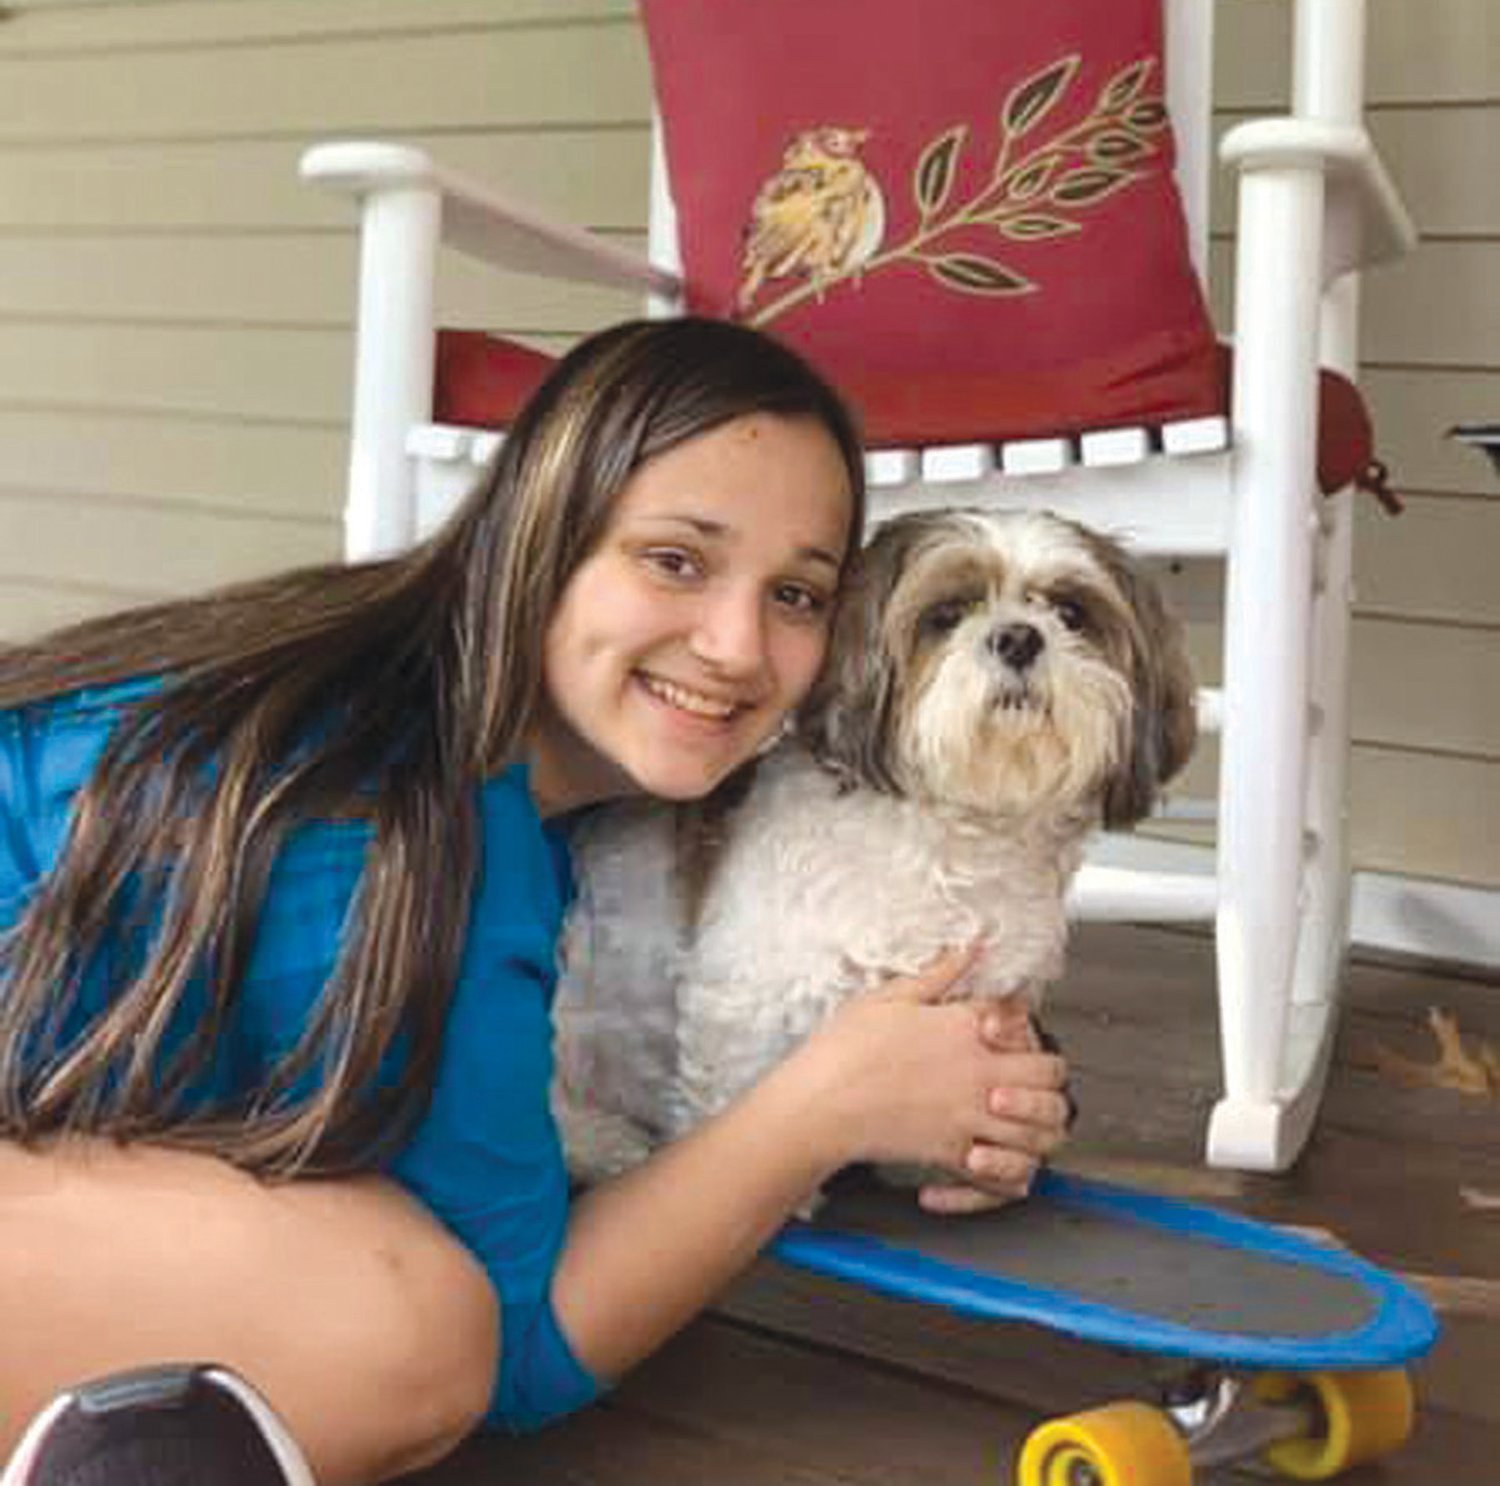 GOOD FRIENDS:Olivia Passaretti poses for a photo with her dog Sonny.